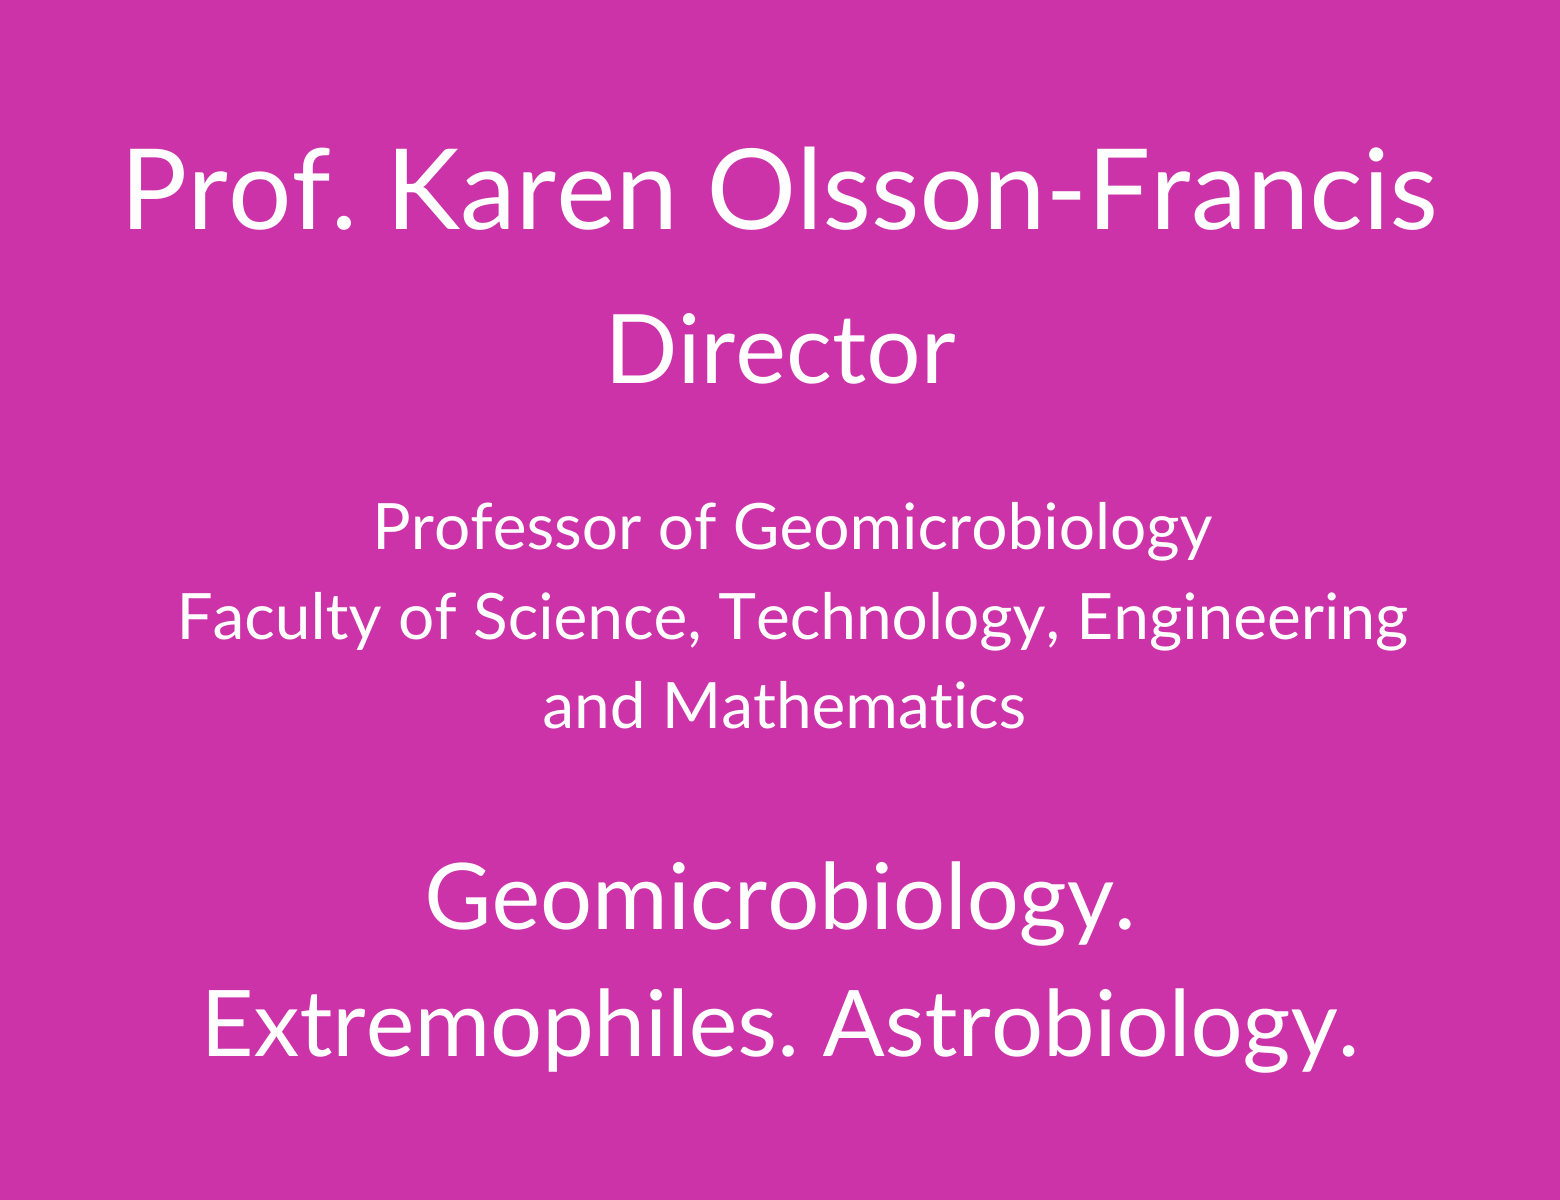 Professor Karen Olsson-Francis. Director. Professor of Geomicrobiology. Faculty of Science. Technology, Engineering and Mathematics. Geomicrobiology. Extremophiles. Astrobiology.